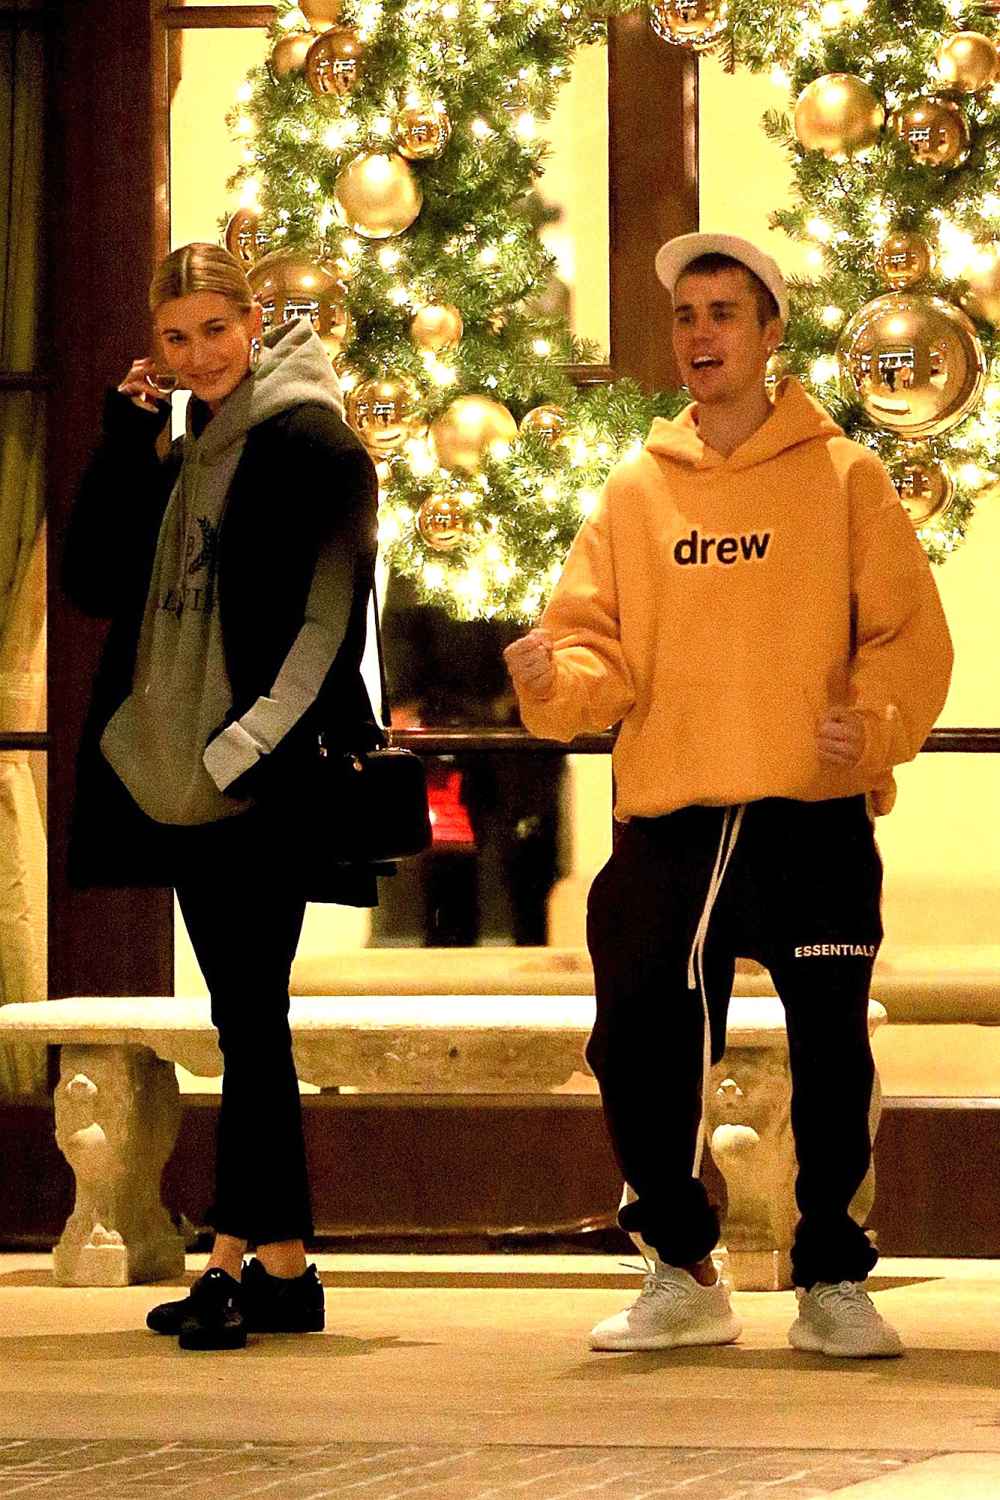 Justin Bieber Belts Out ‘Sexual Healing’ on Street as Wife Hailey Baldwin Awkwardly Stands By